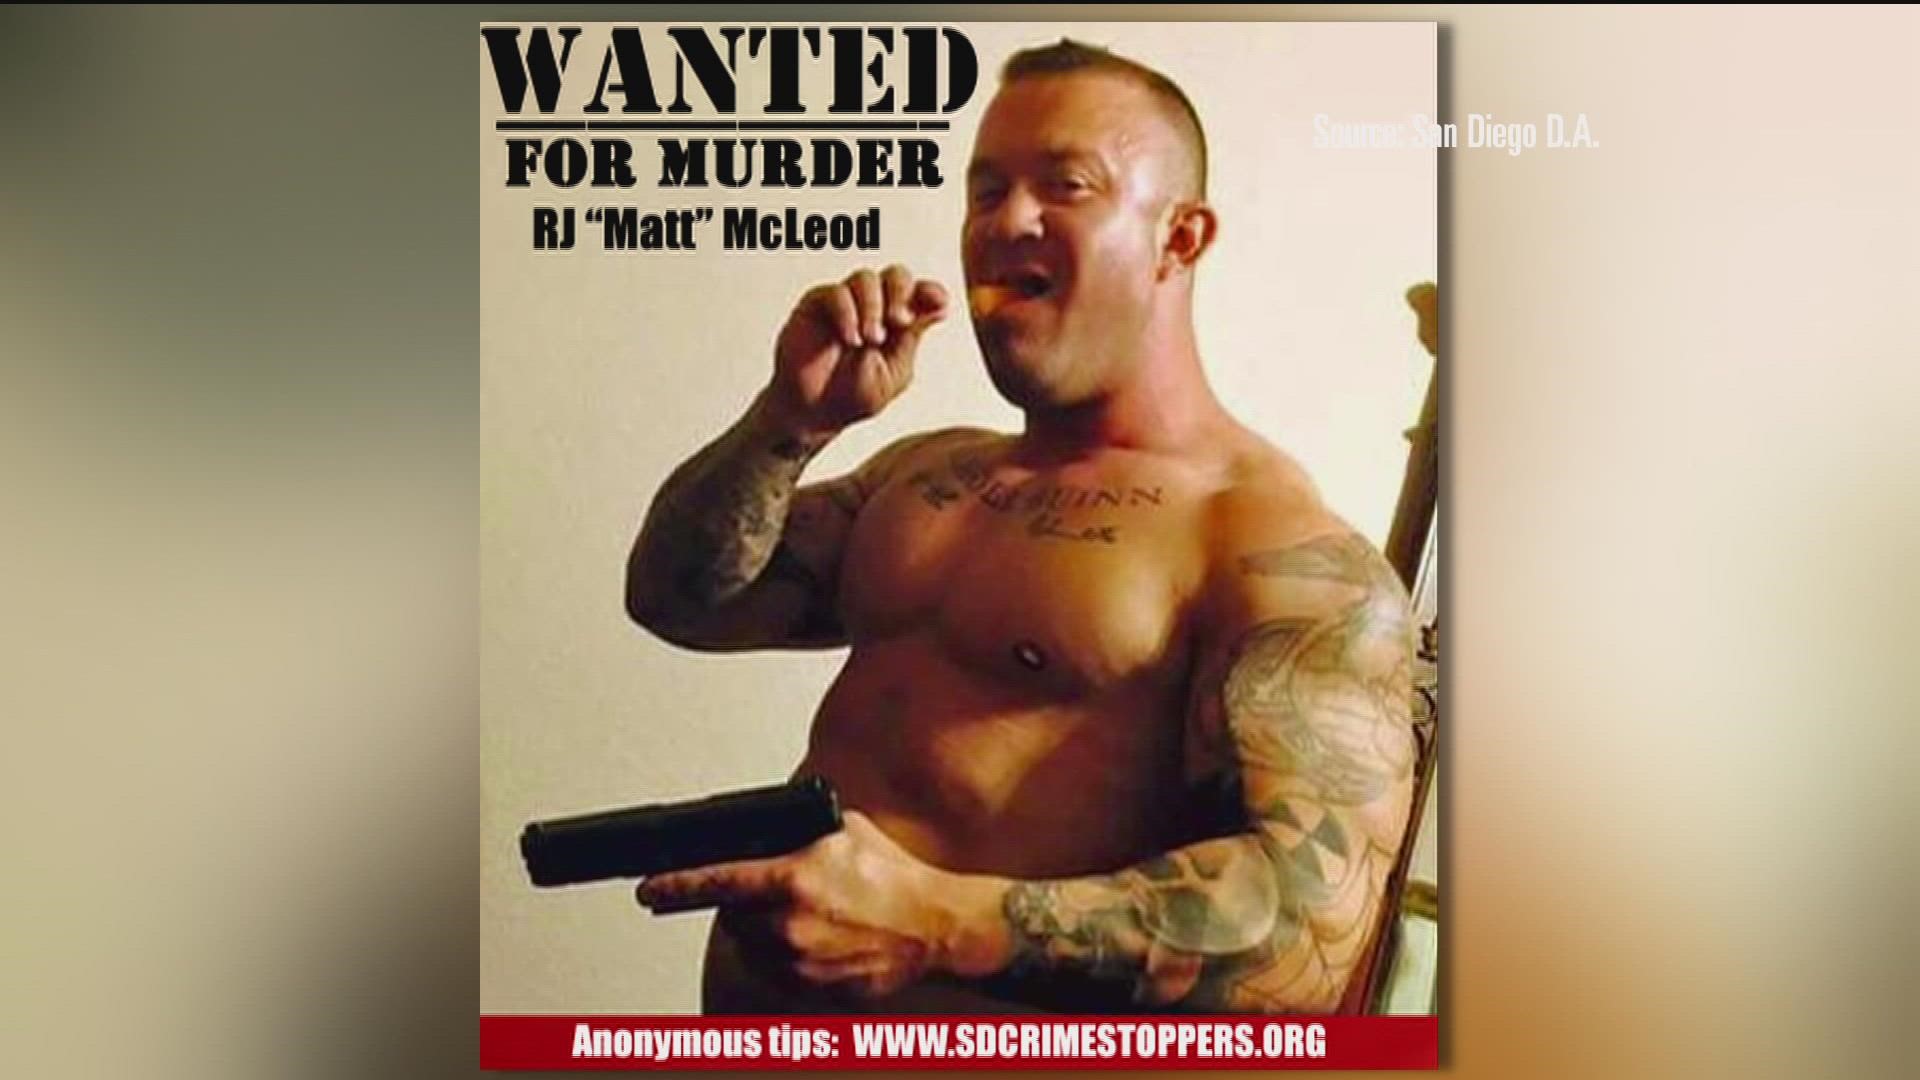 The US Marshals confirmed to CBS 8 that McLeod was arrested on Monday morning by El Salvadorian authorities along with US Marshals from San Diego.